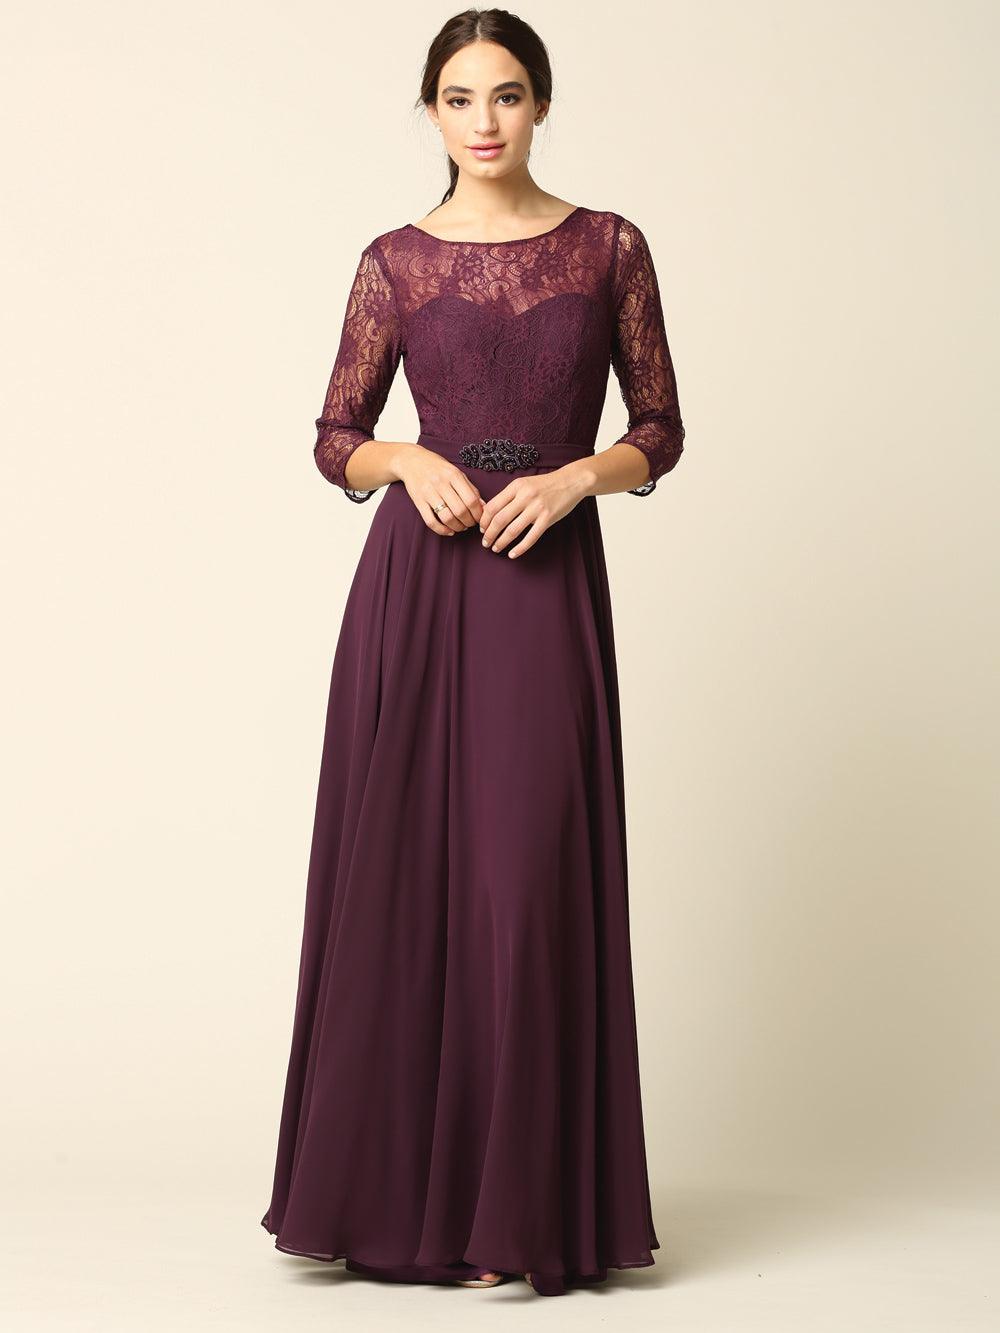 Mauve Mother of the Bride Long Formal Lace Chiffon Dress for $135.99 ...